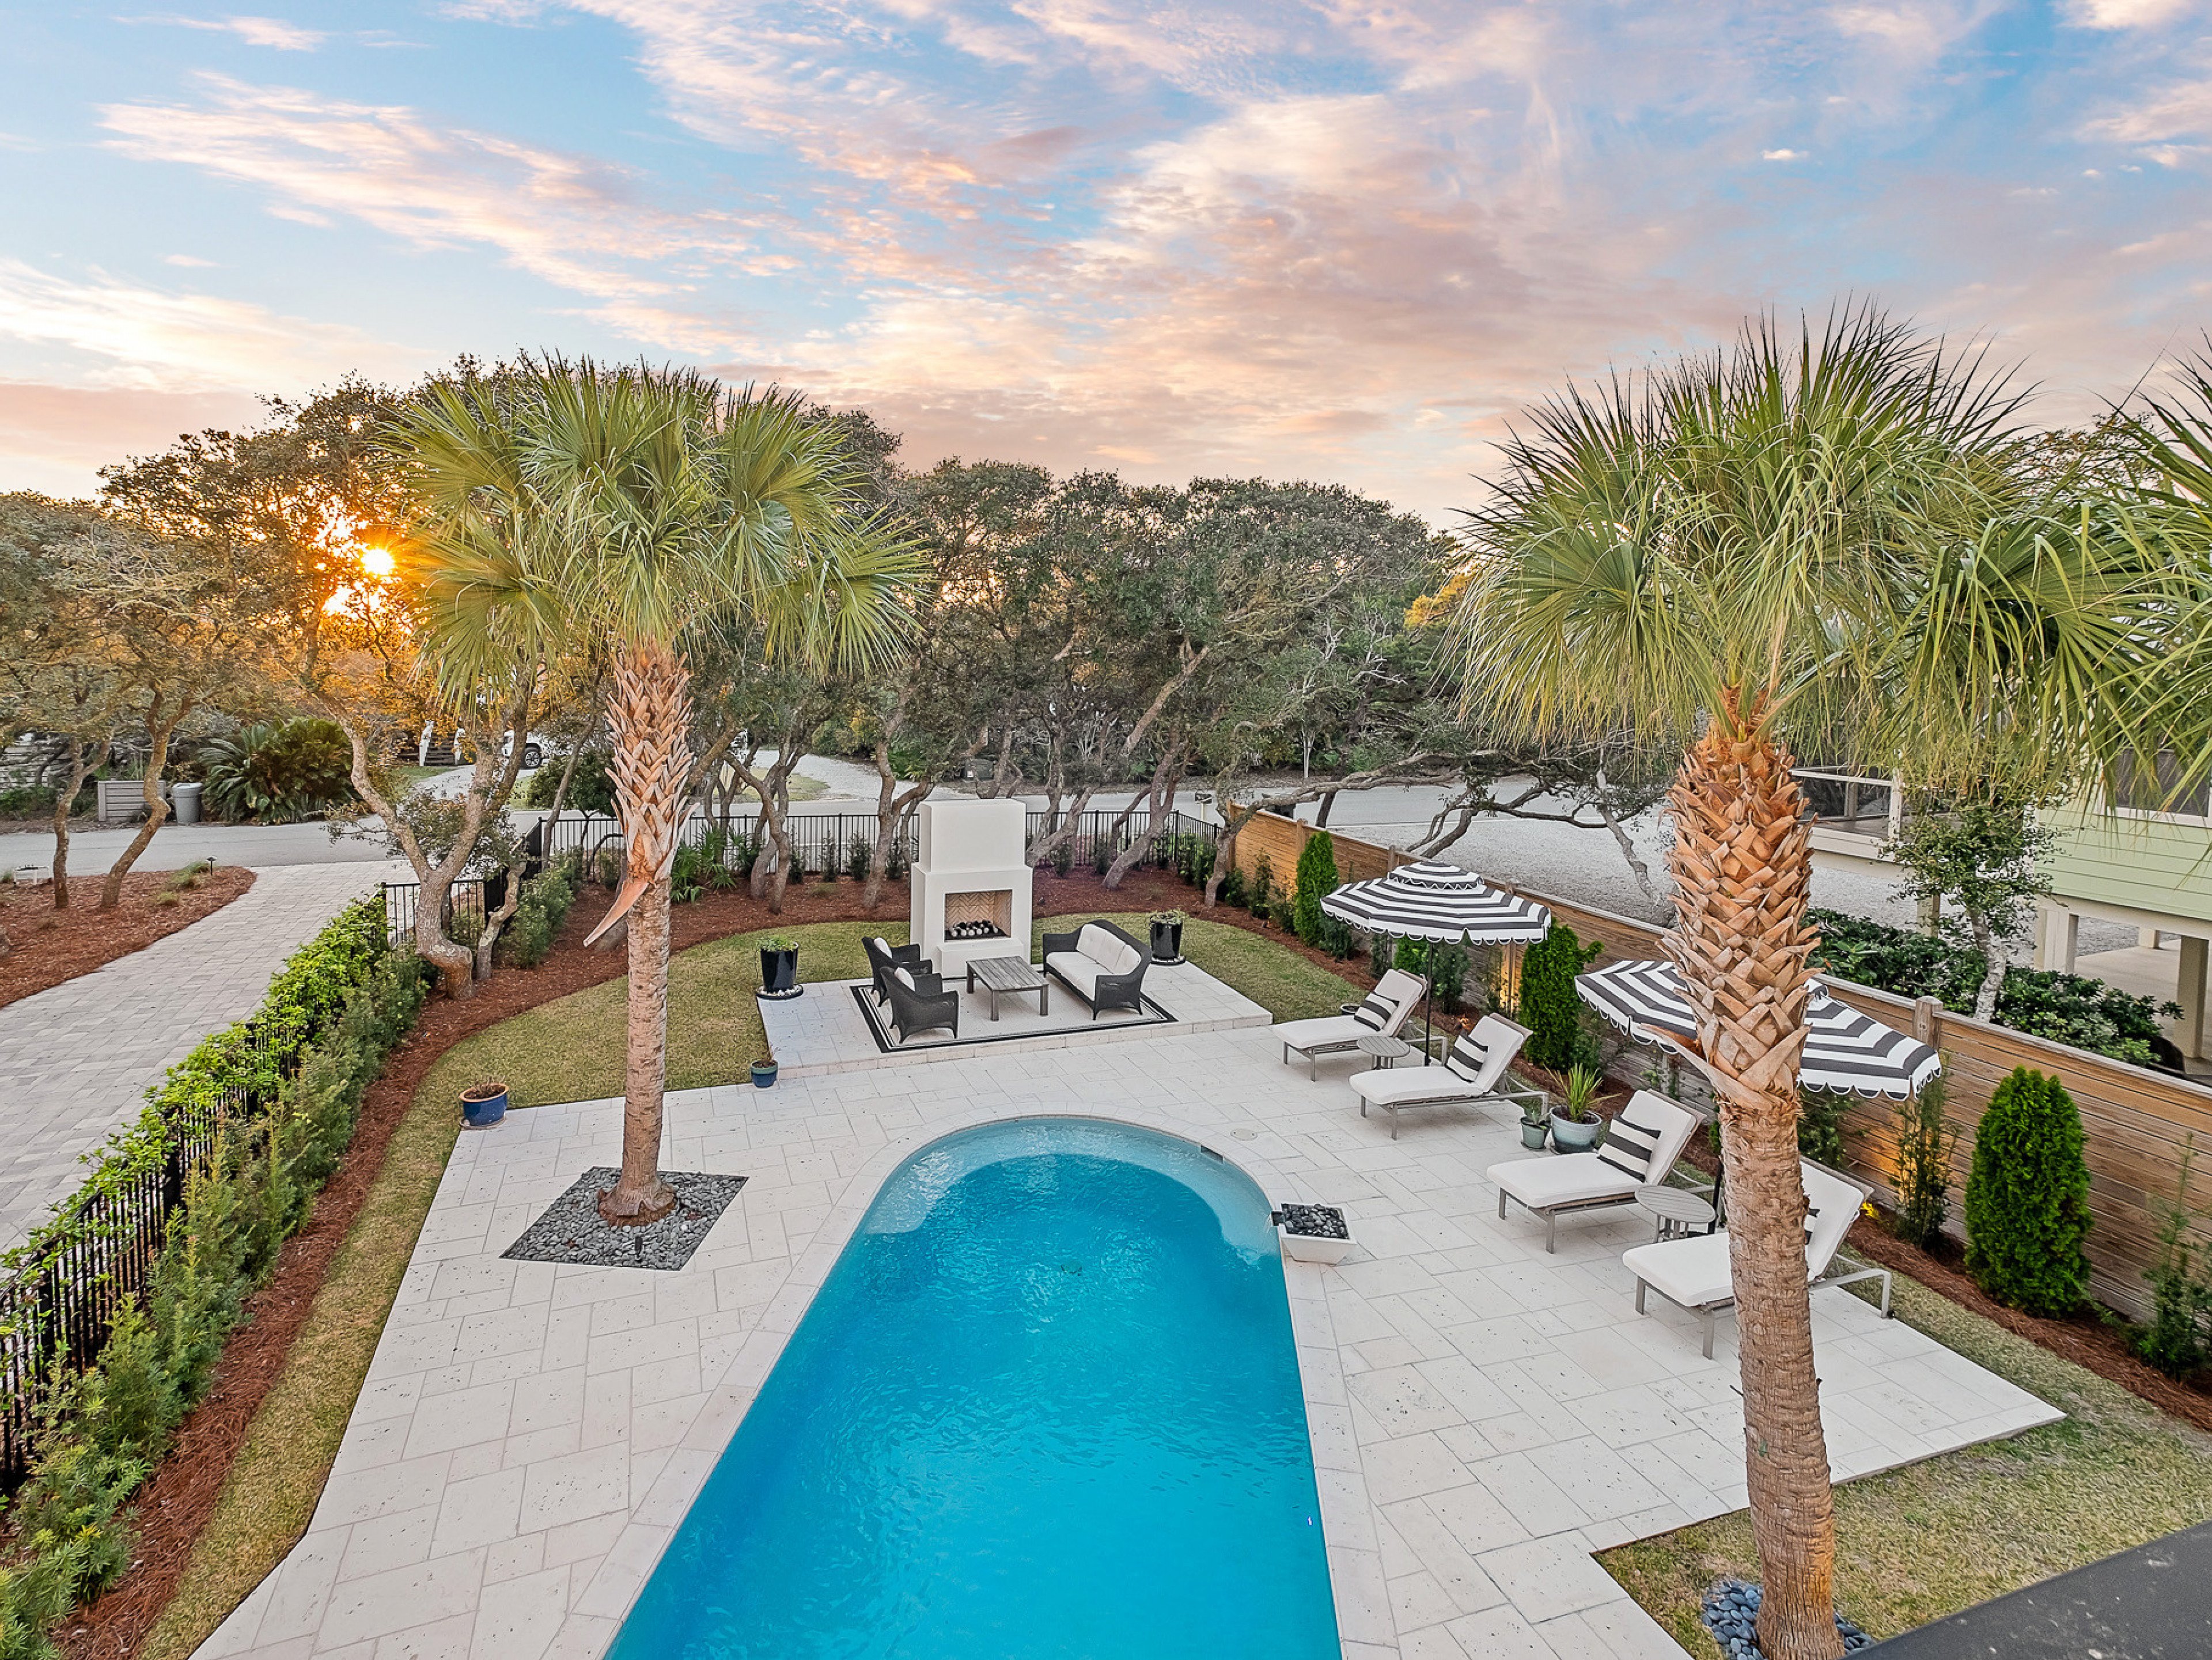 Grayton Beach 2 30A vacation rentals with private pool